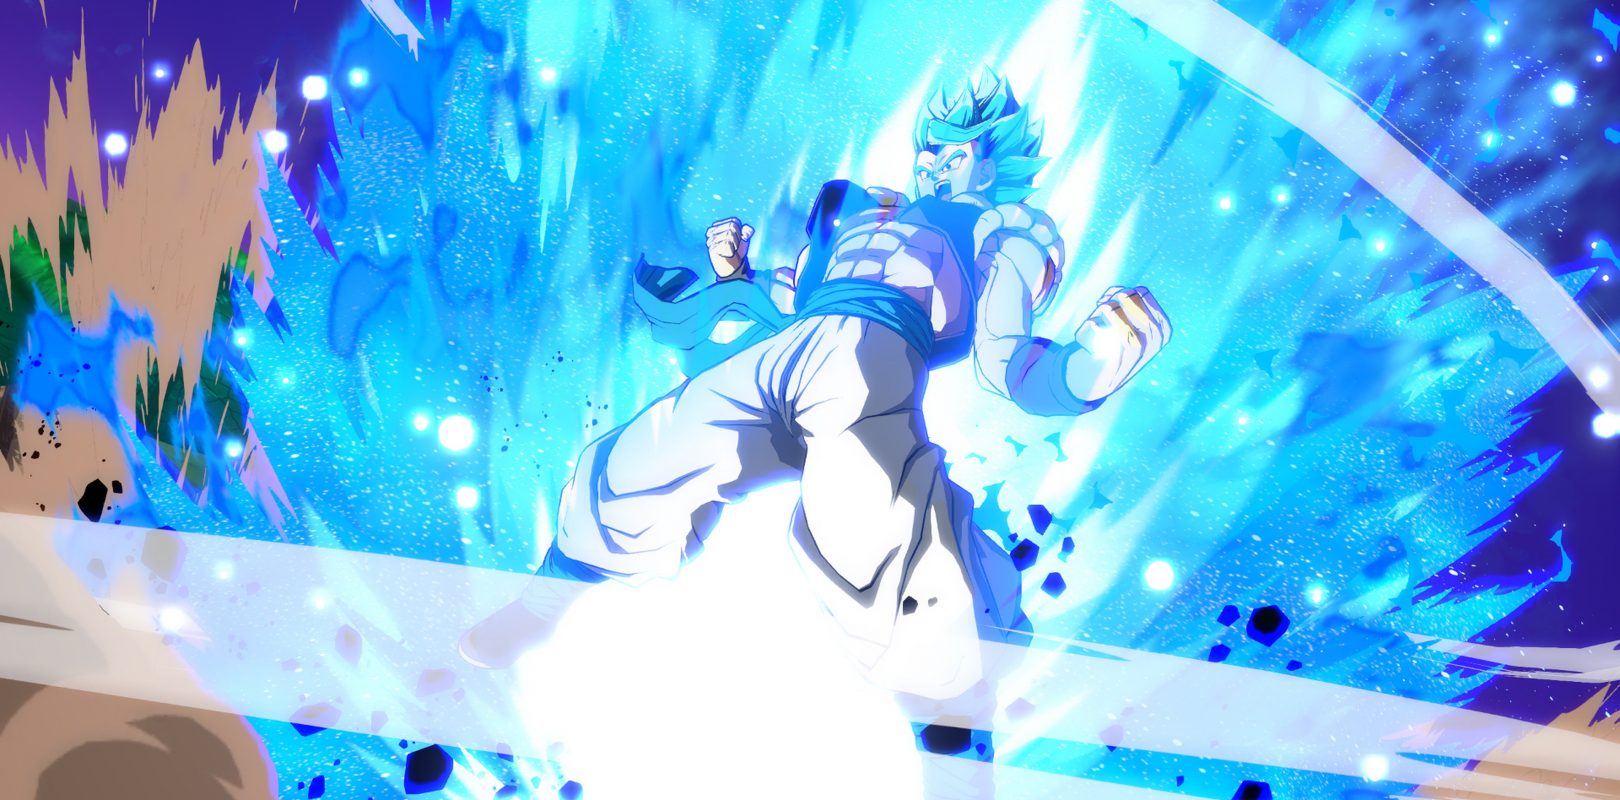 Gogeta Gameplay Shows Off The Amazing Fusion Character For